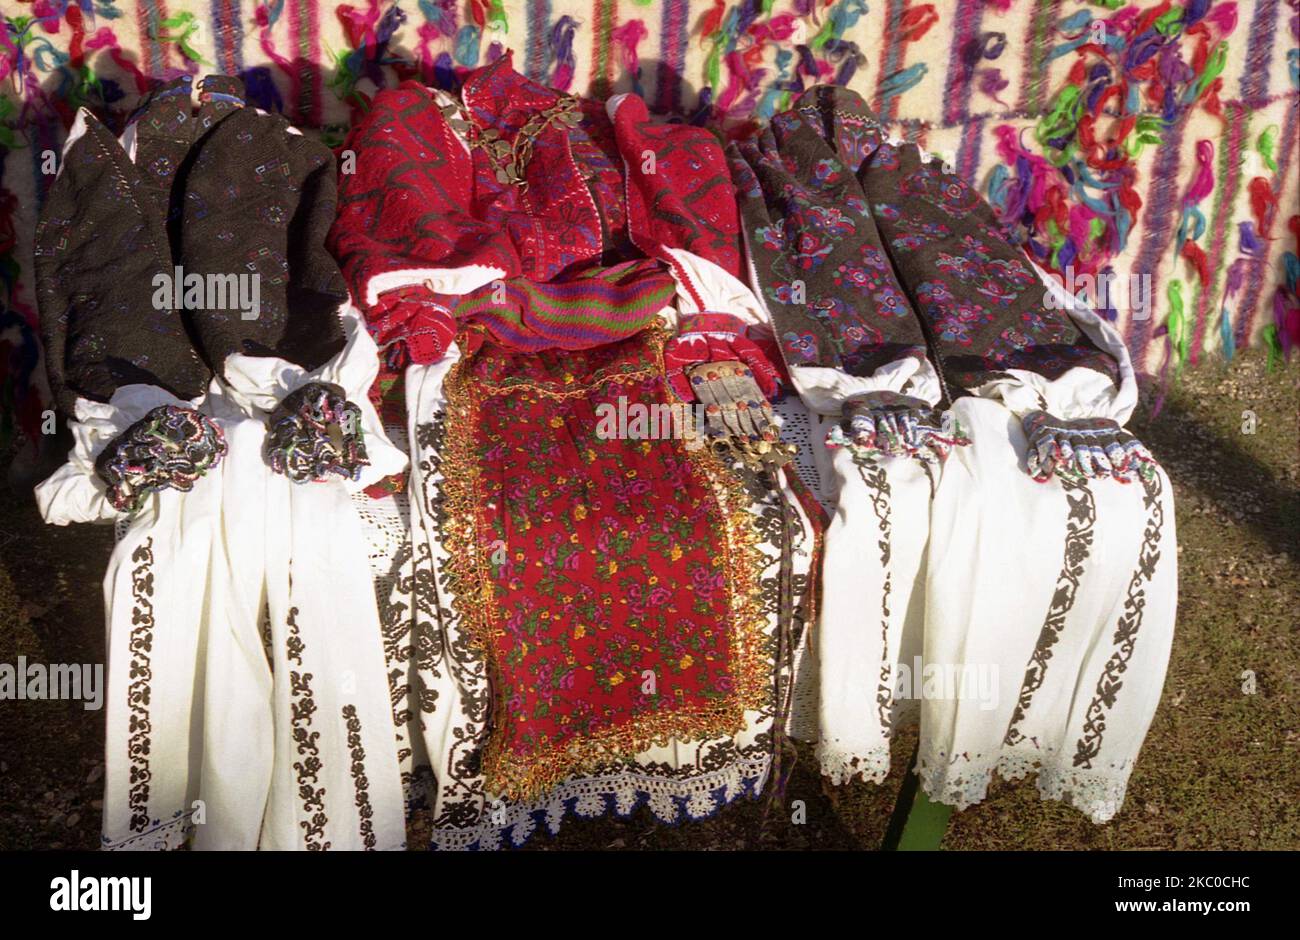 Hunedoara County, Romania, 2003. Different authentic traditional women costumes from the region of Padureni. The red colored clothing are worn by young women, while the white and grey/ black ones are specific for elderly women. Stock Photo